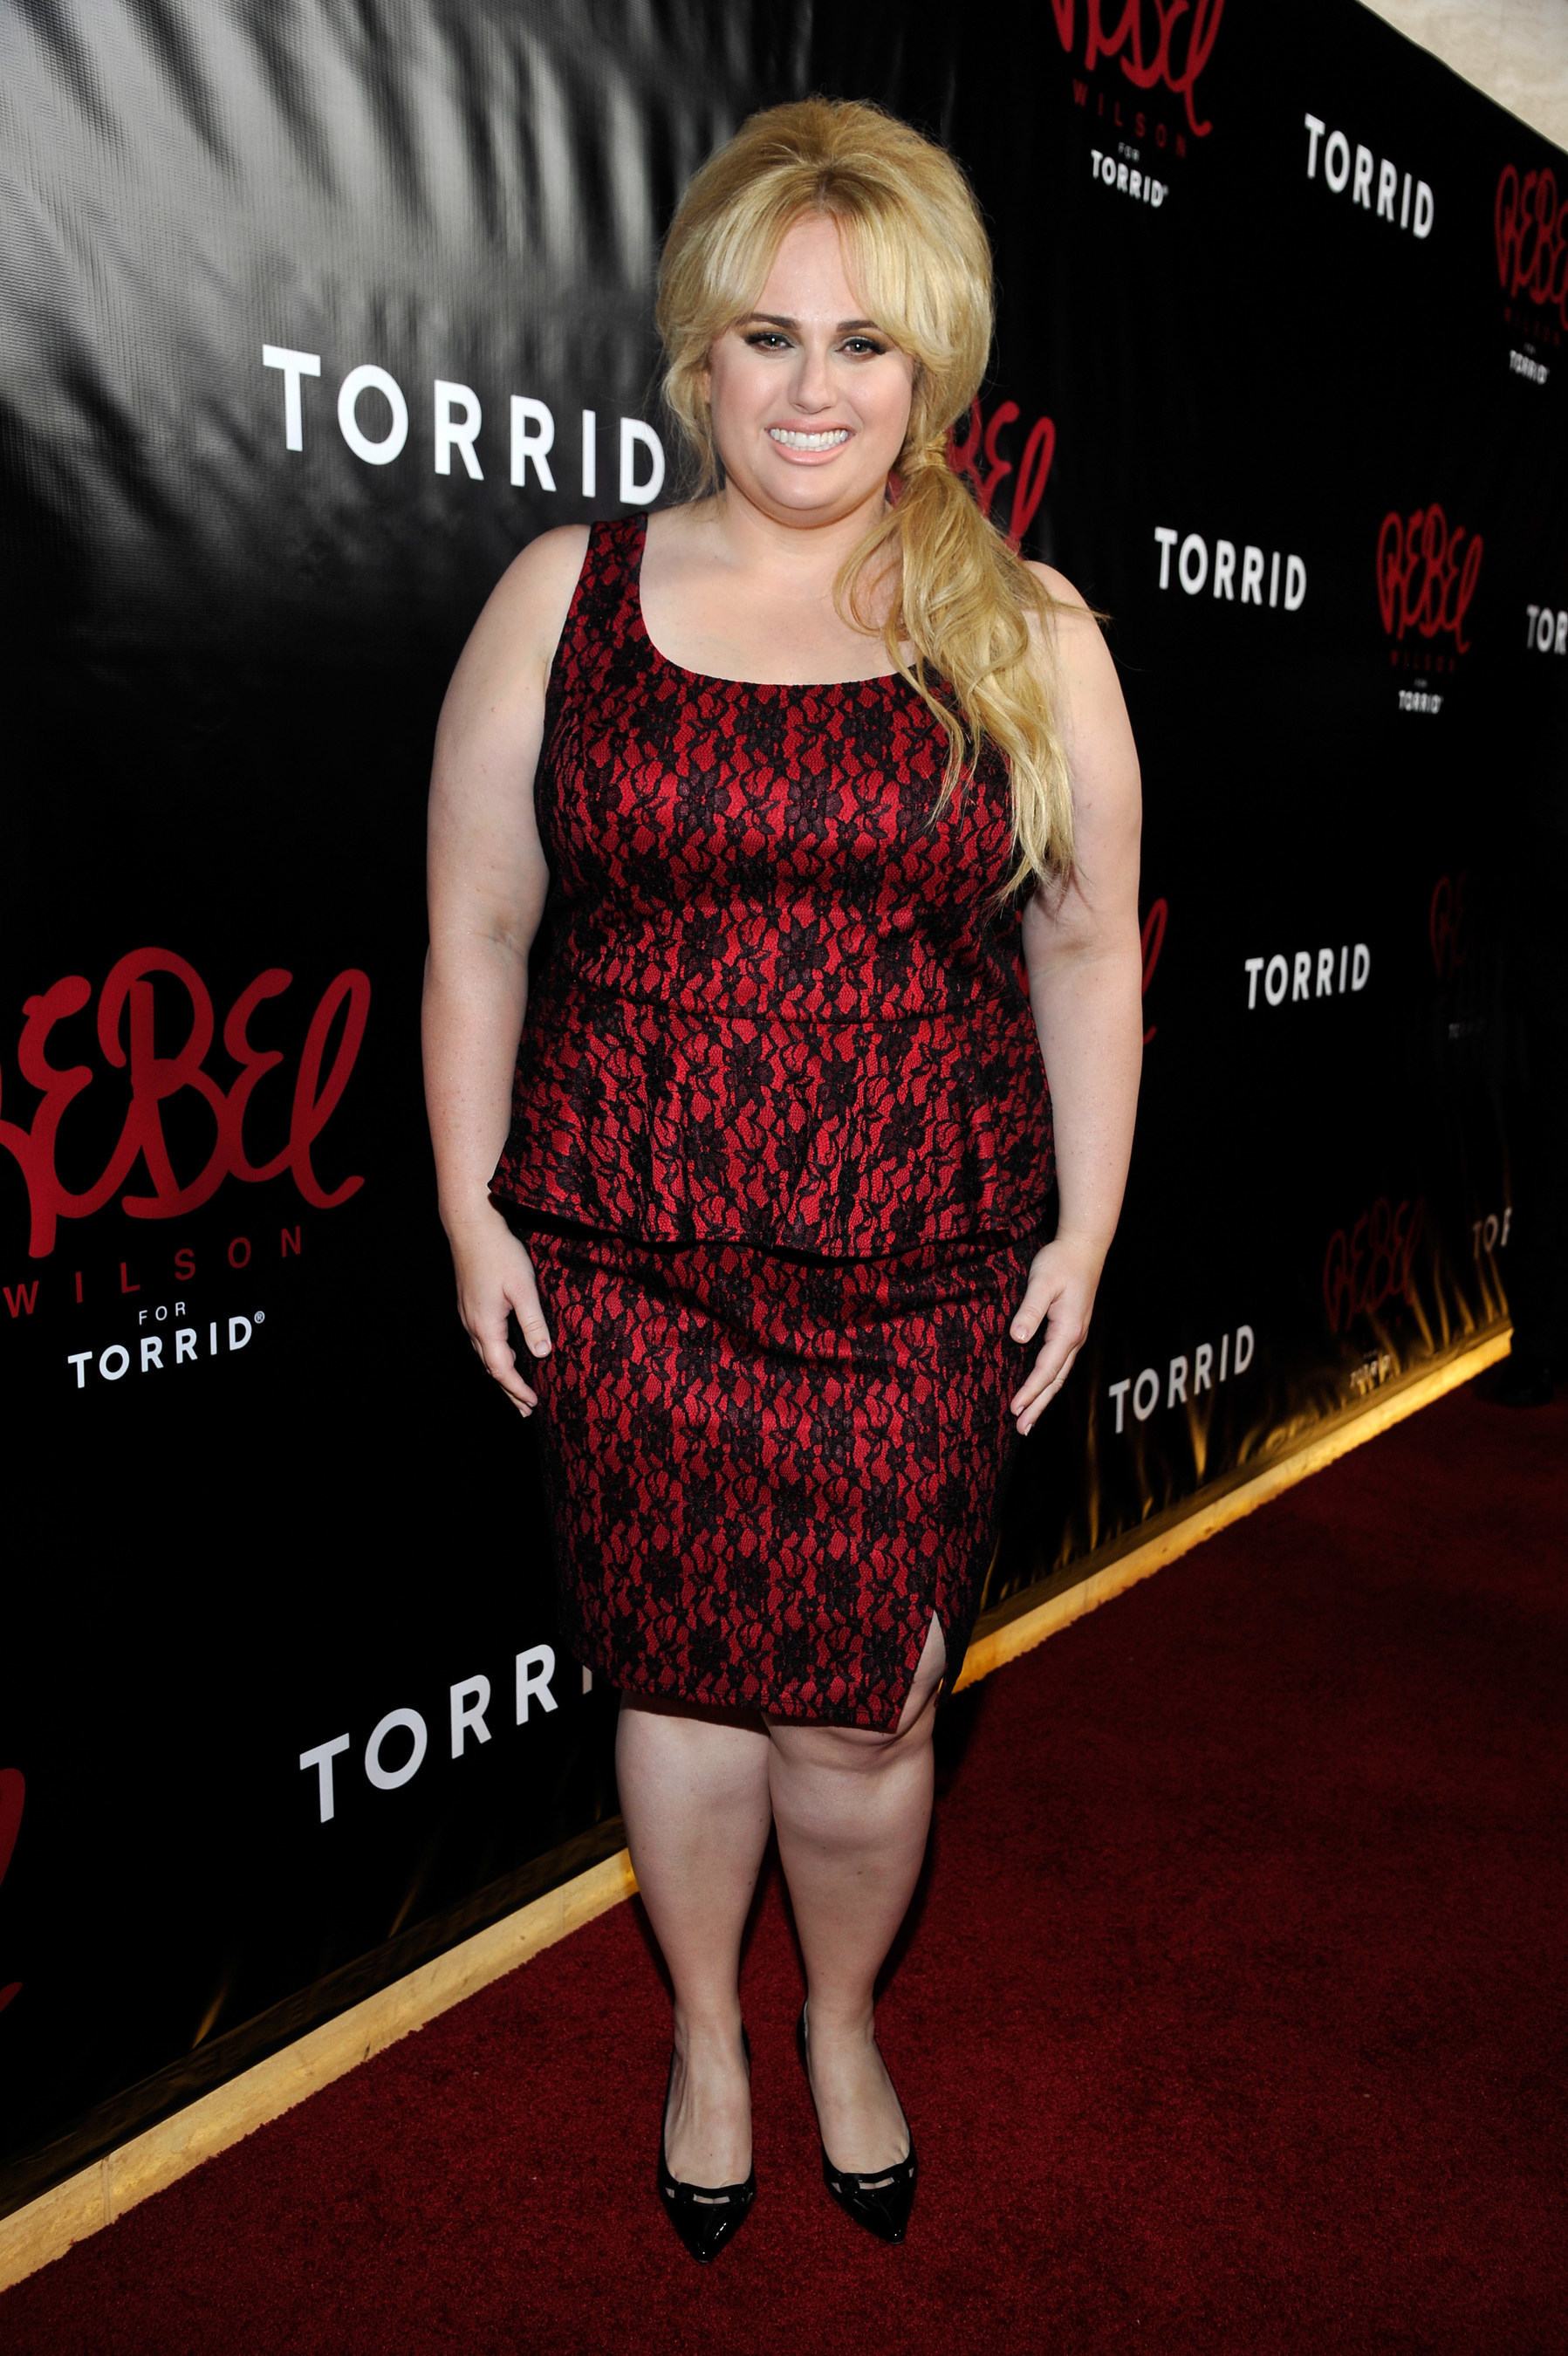 Rebel Wilson Launches REBEL FOR TORRID Fashion Collection at MILK in Hollywood